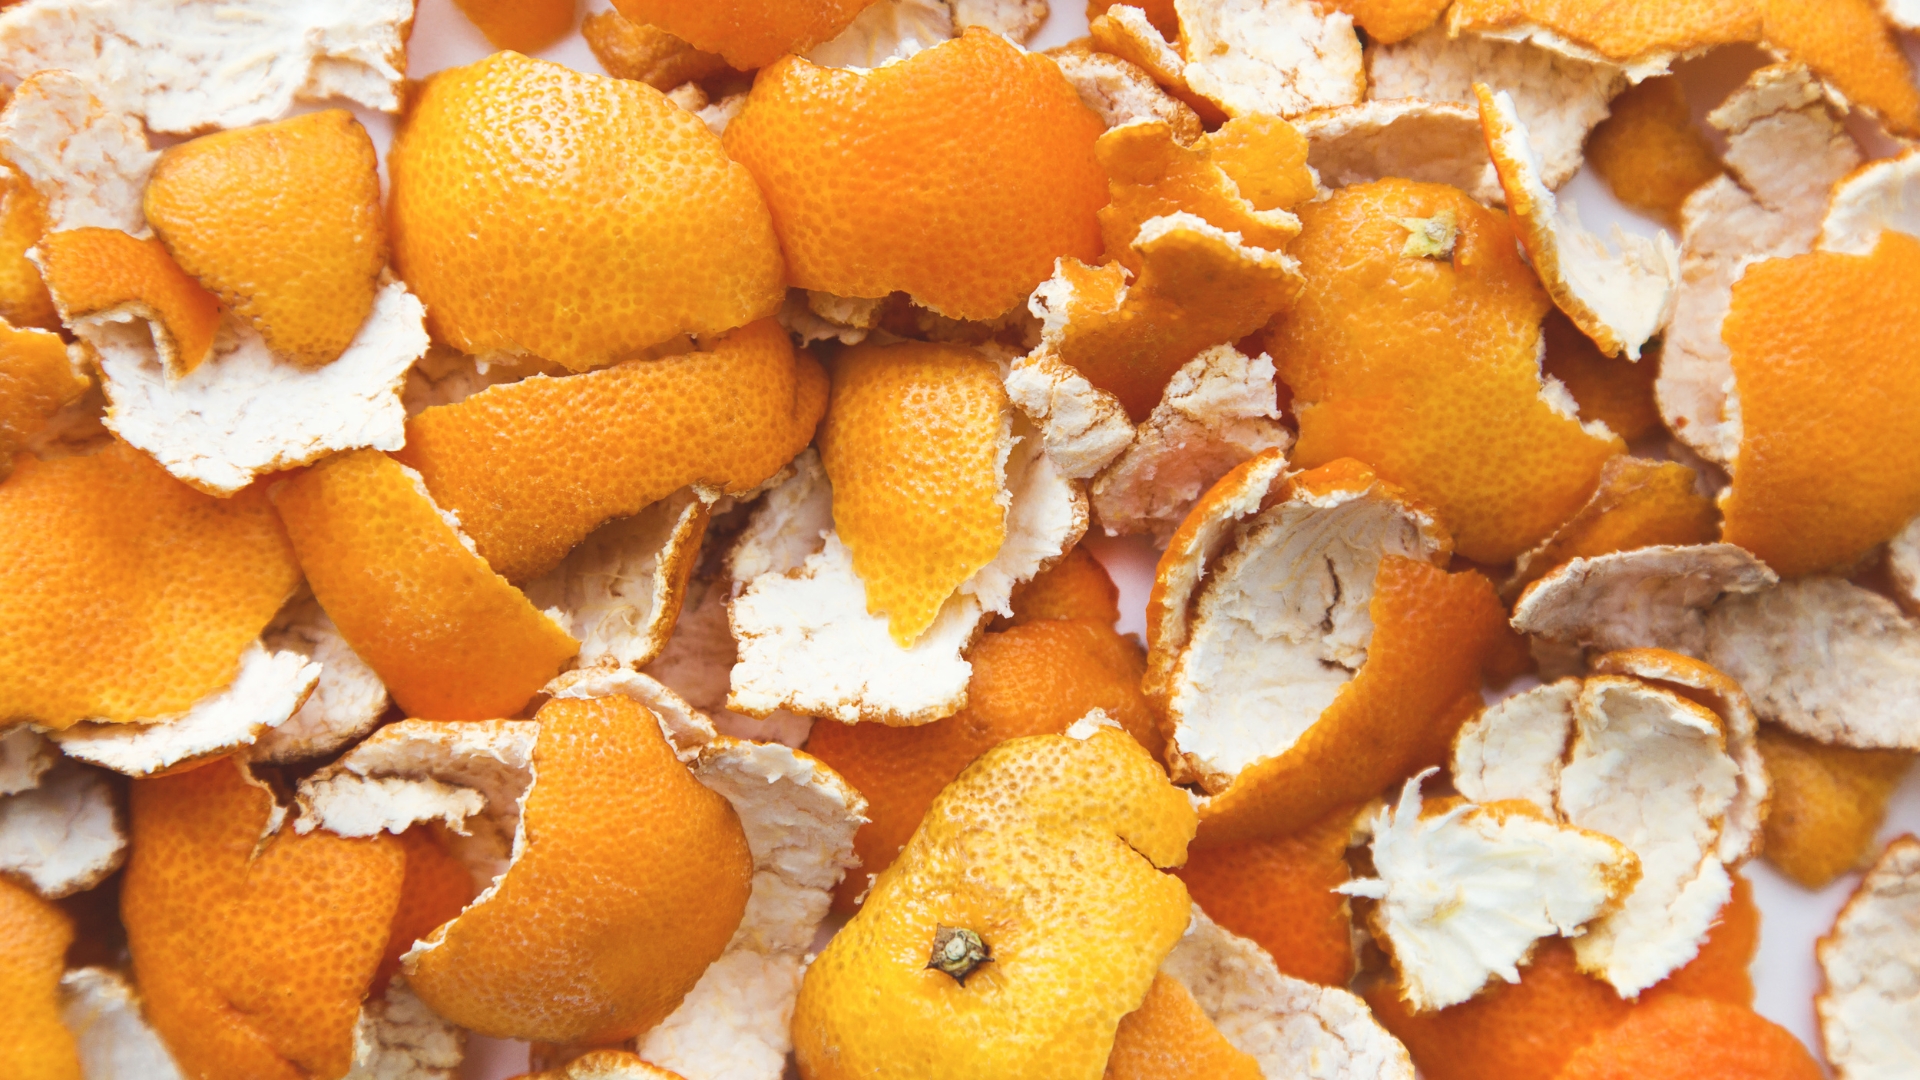 Can Orange Peels Really Do Wonders For Your Garden And Help Your Plants Thrive?